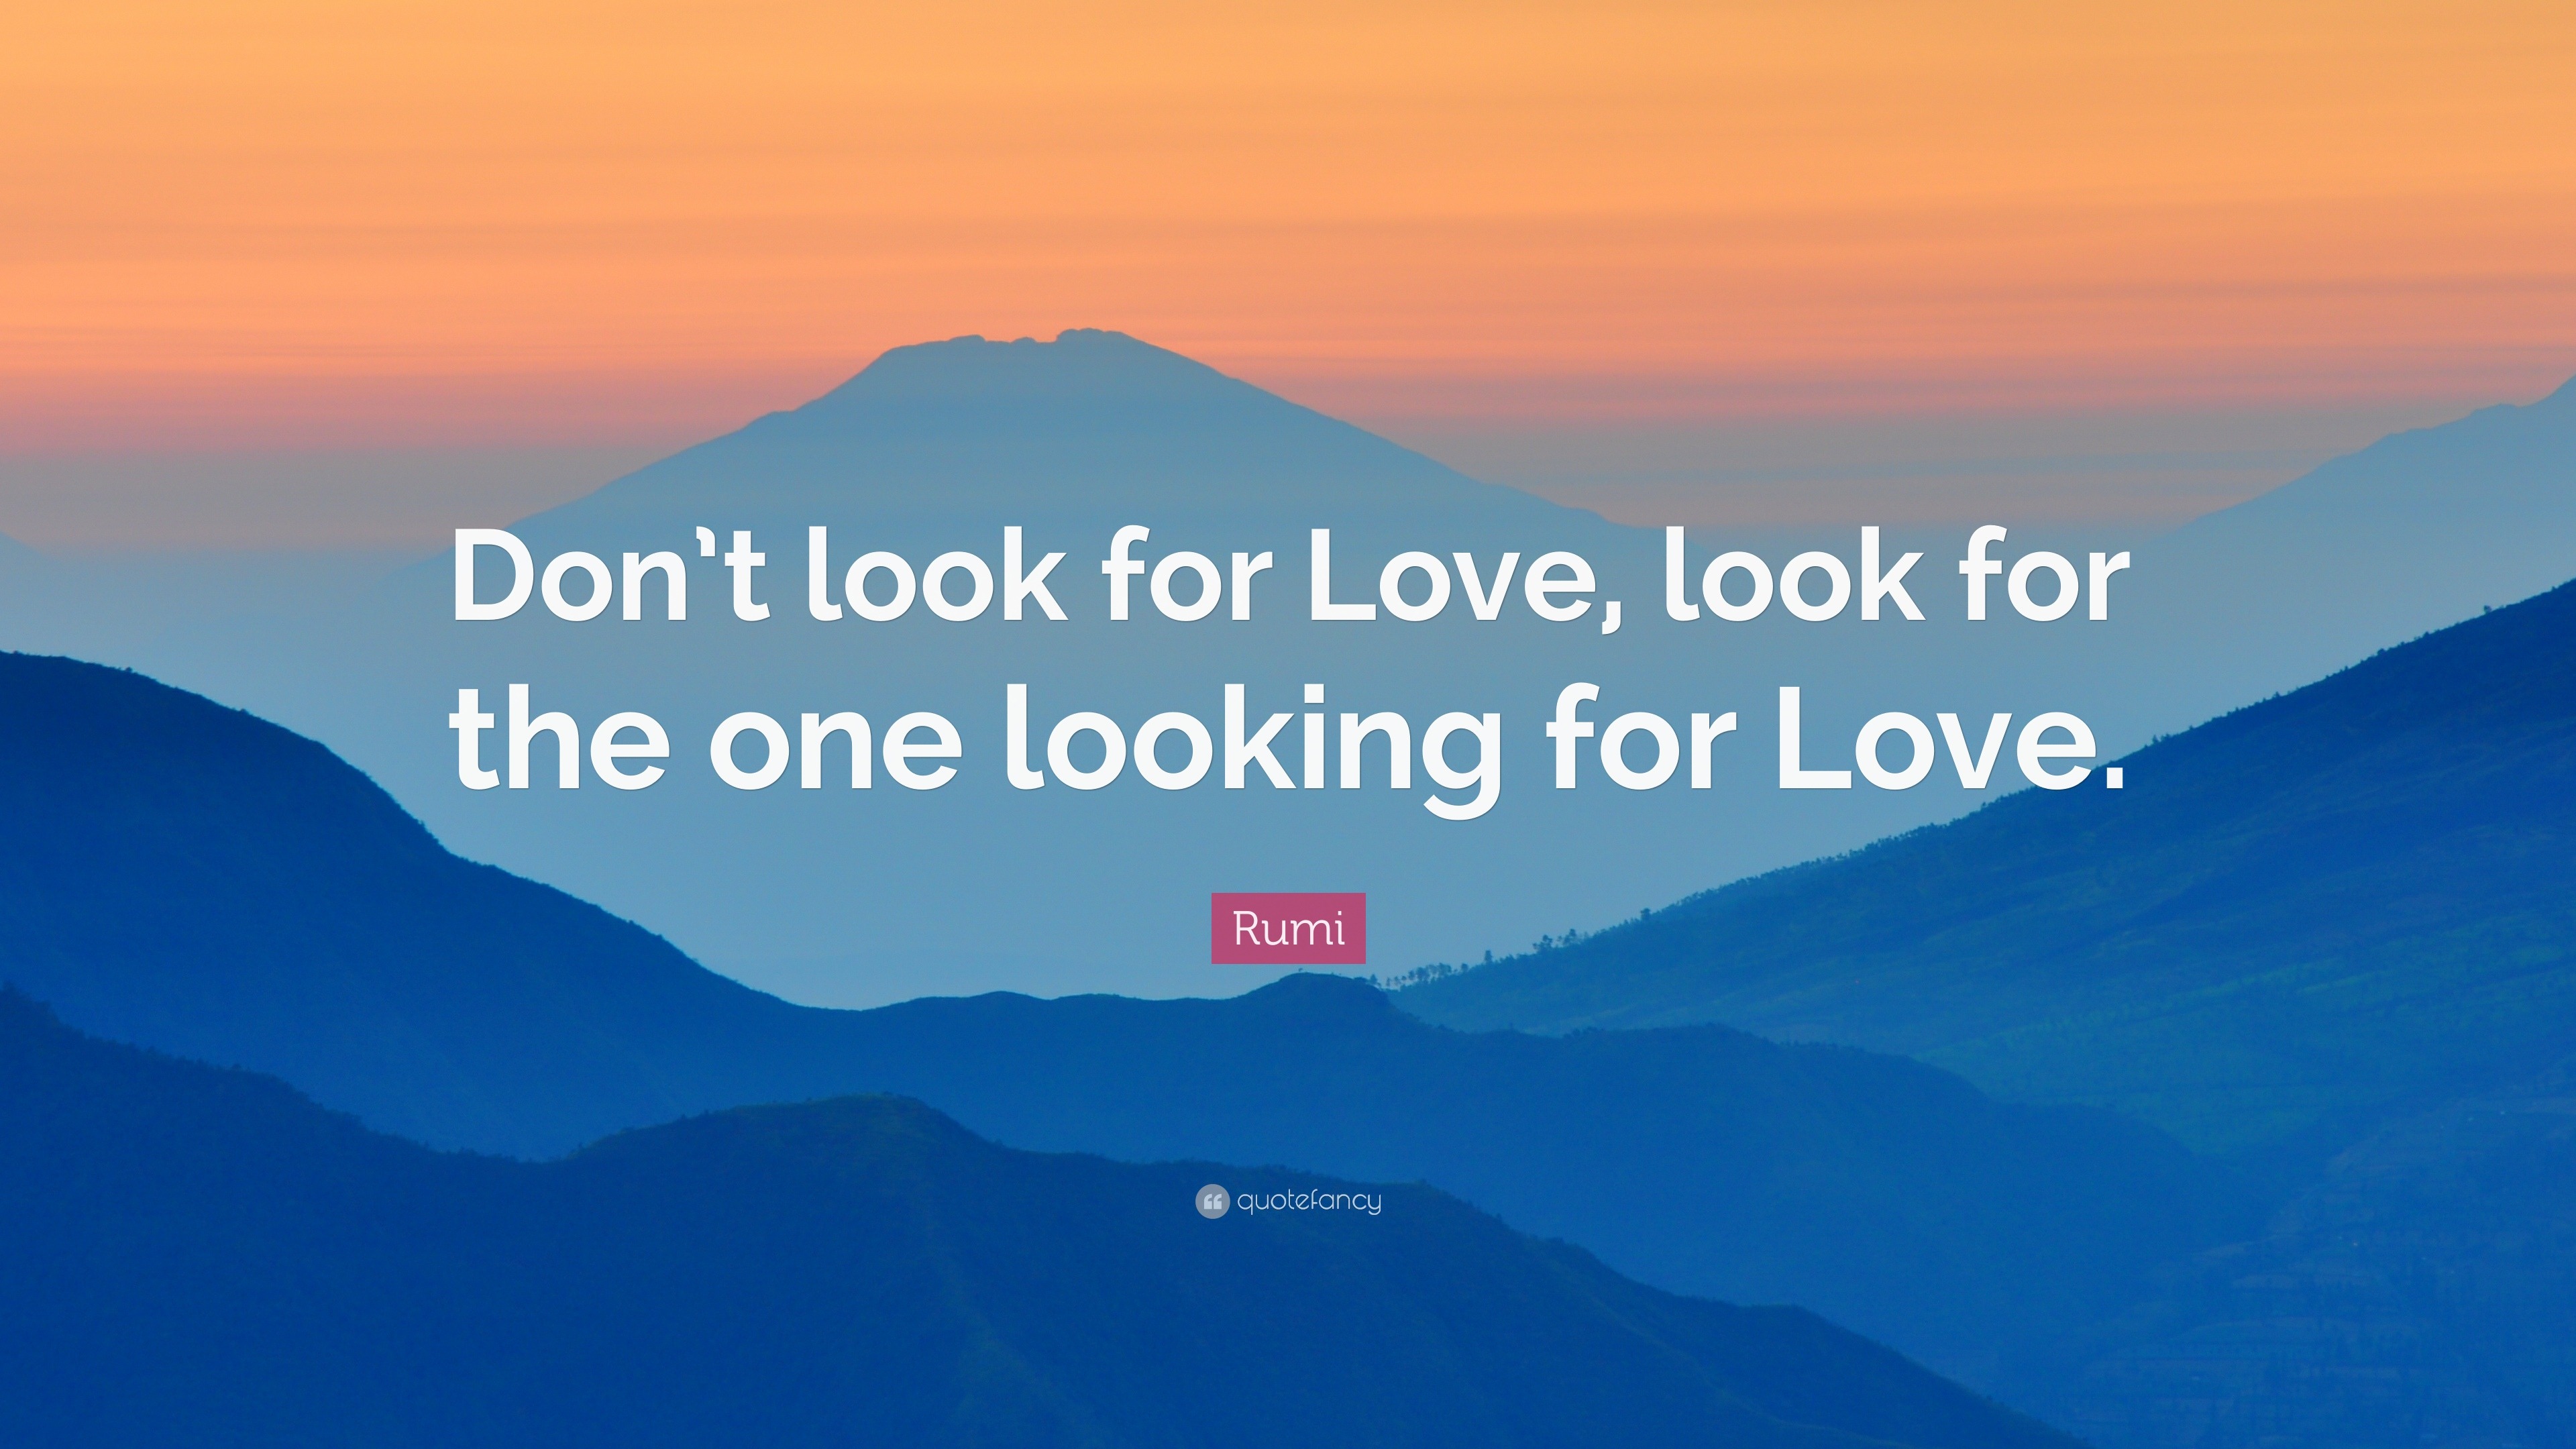 Rumi Quote “Don t look for Love look for the one looking